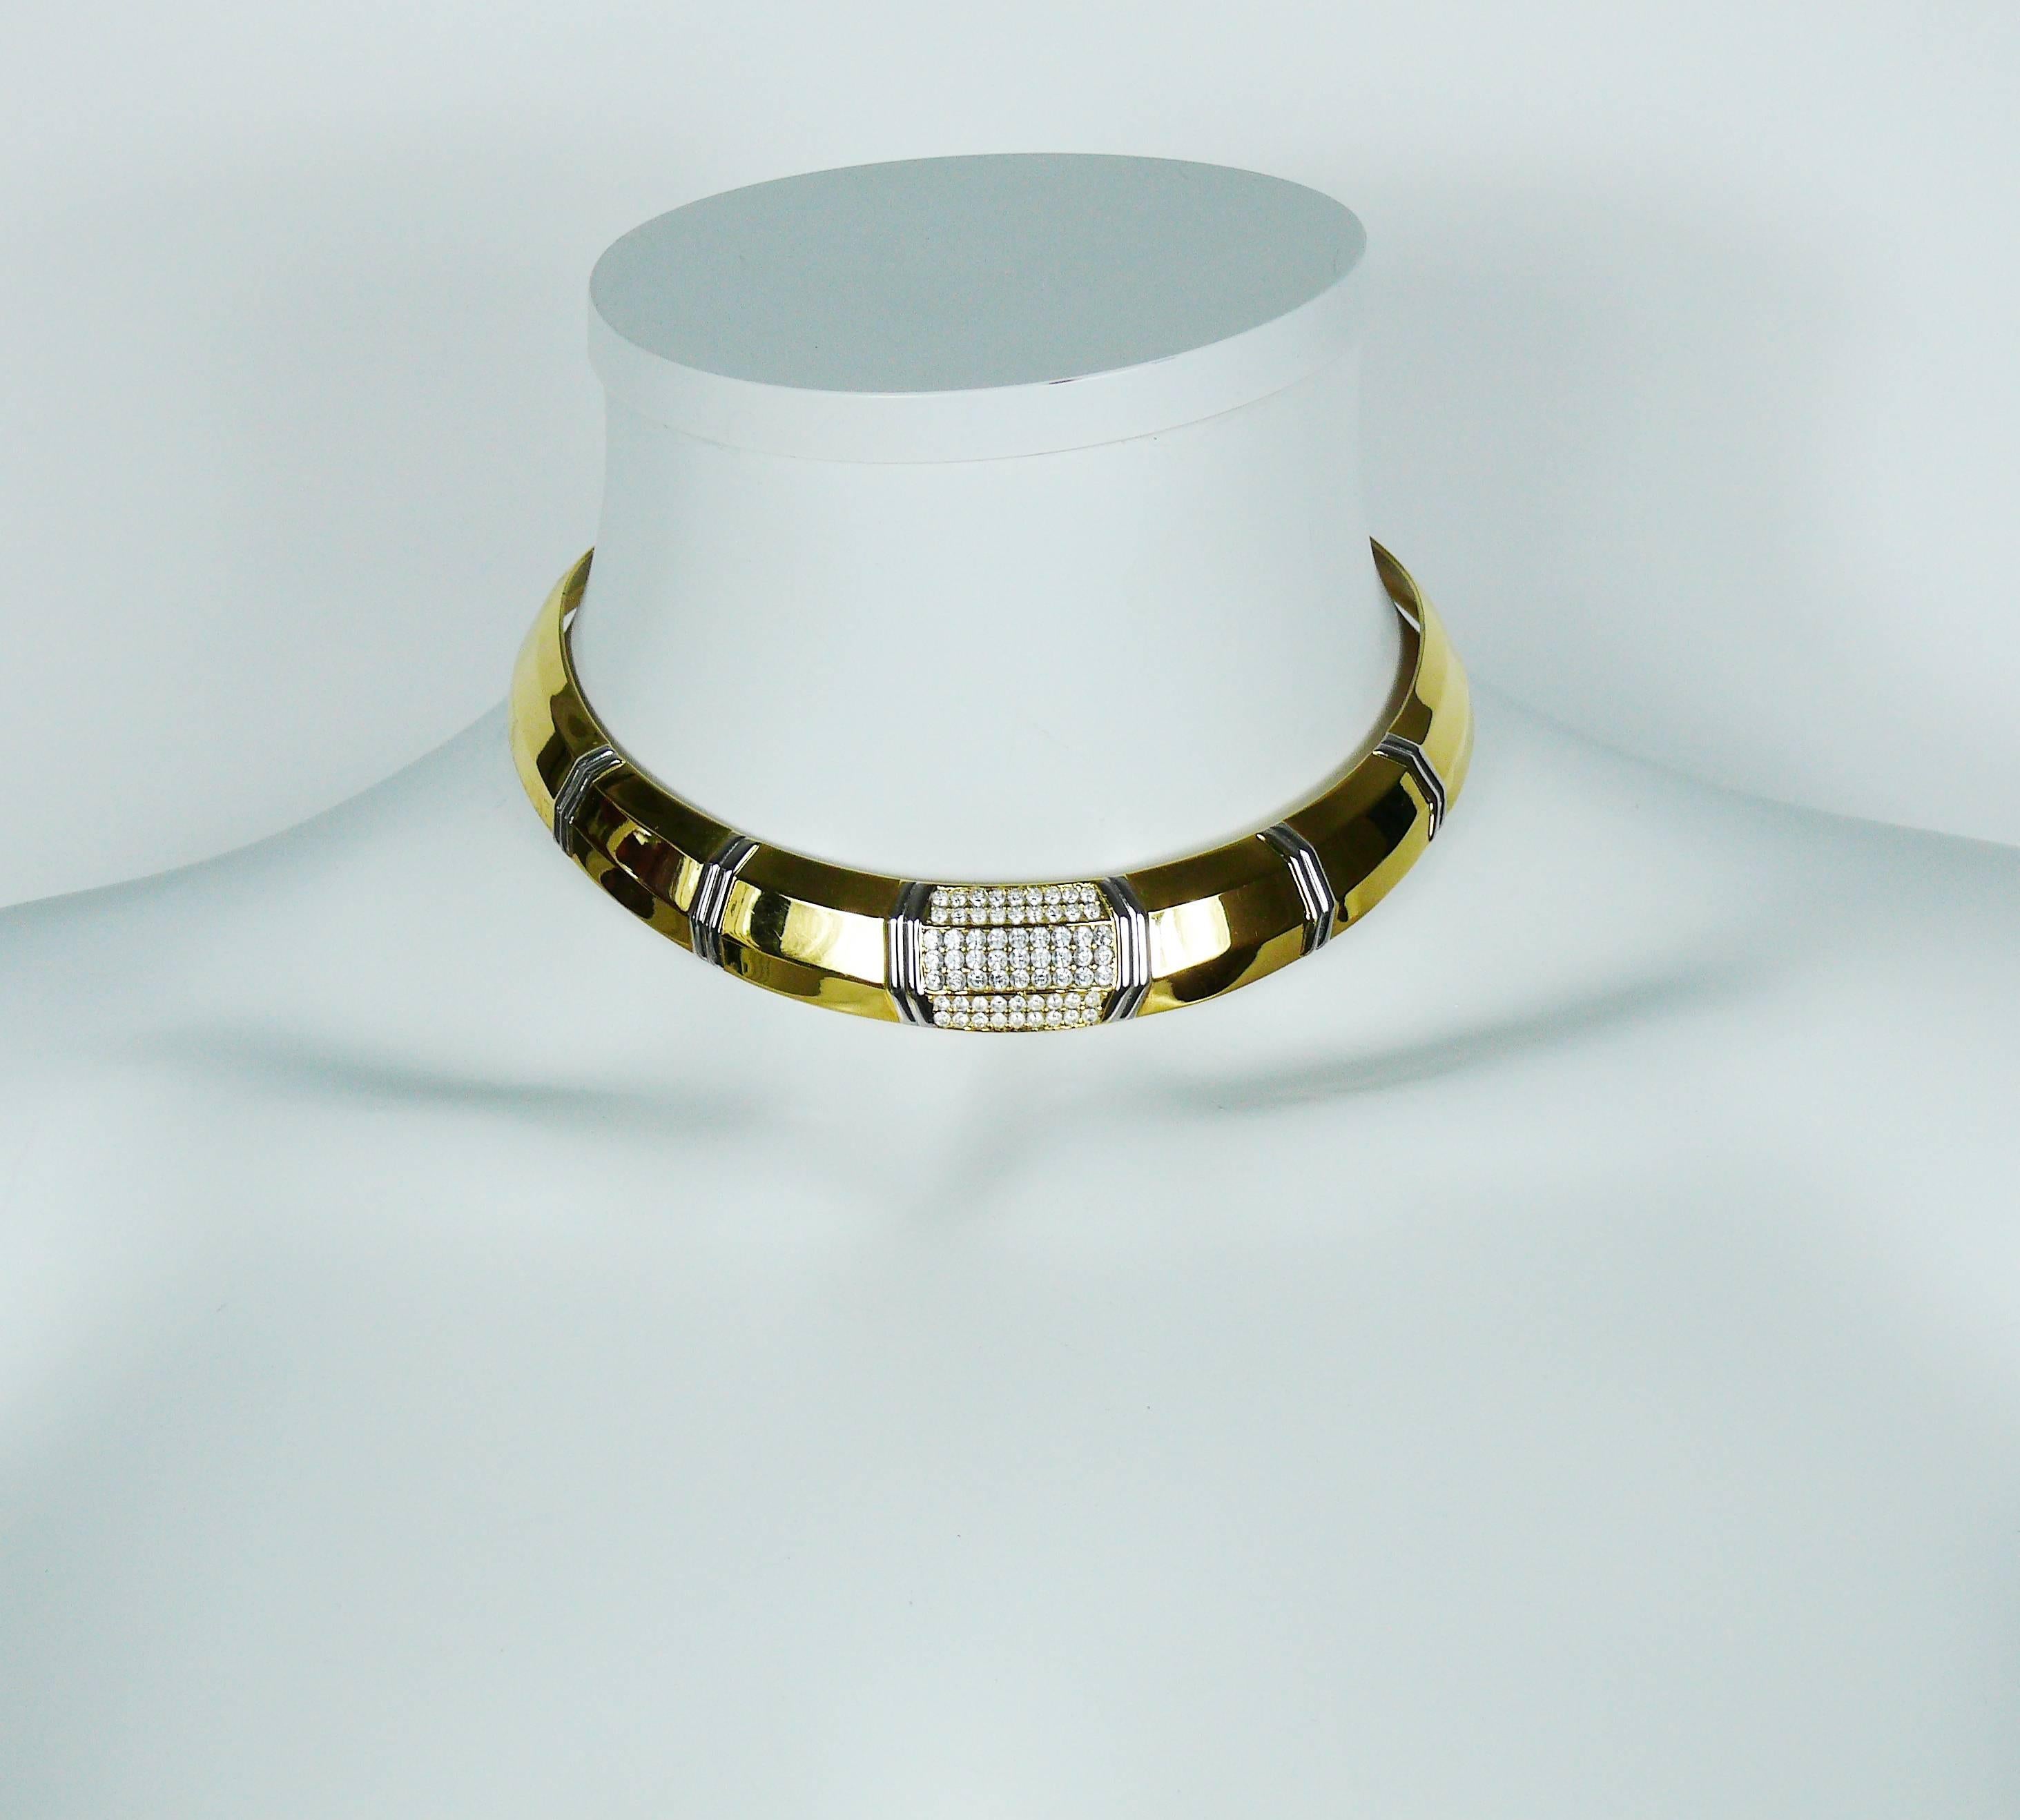 LANVIN vintage ART DECO inspired two-tone rigid choker necklace with clear crystal embellishement.

Embossed LANVIN Germany.  

Indicative measurements : inner circumference approx 34.87 cm (13.73 inches). 

JEWELRY CONDITION CHART
- New or never